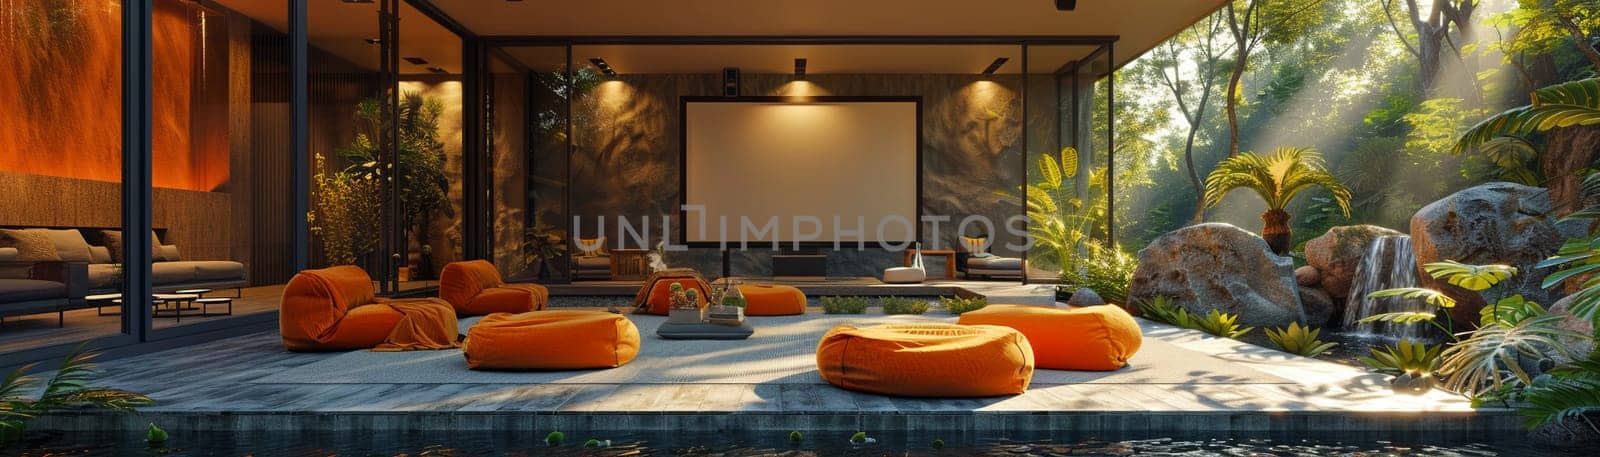 Outdoor cinema with bean bags and a projector under the stars3D render.